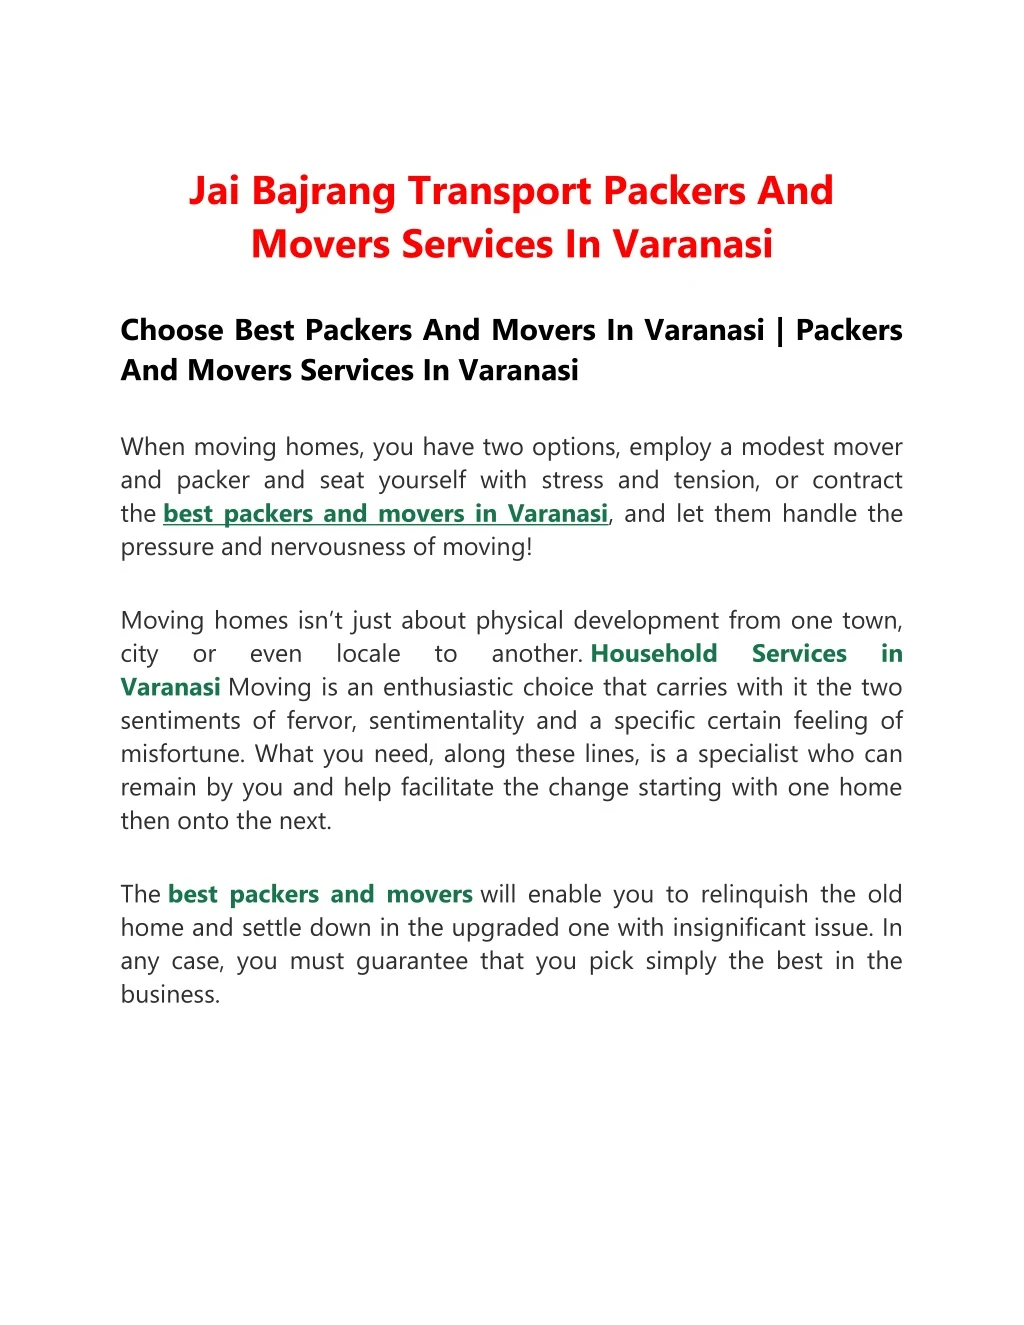 jai bajrang transport packers and movers services